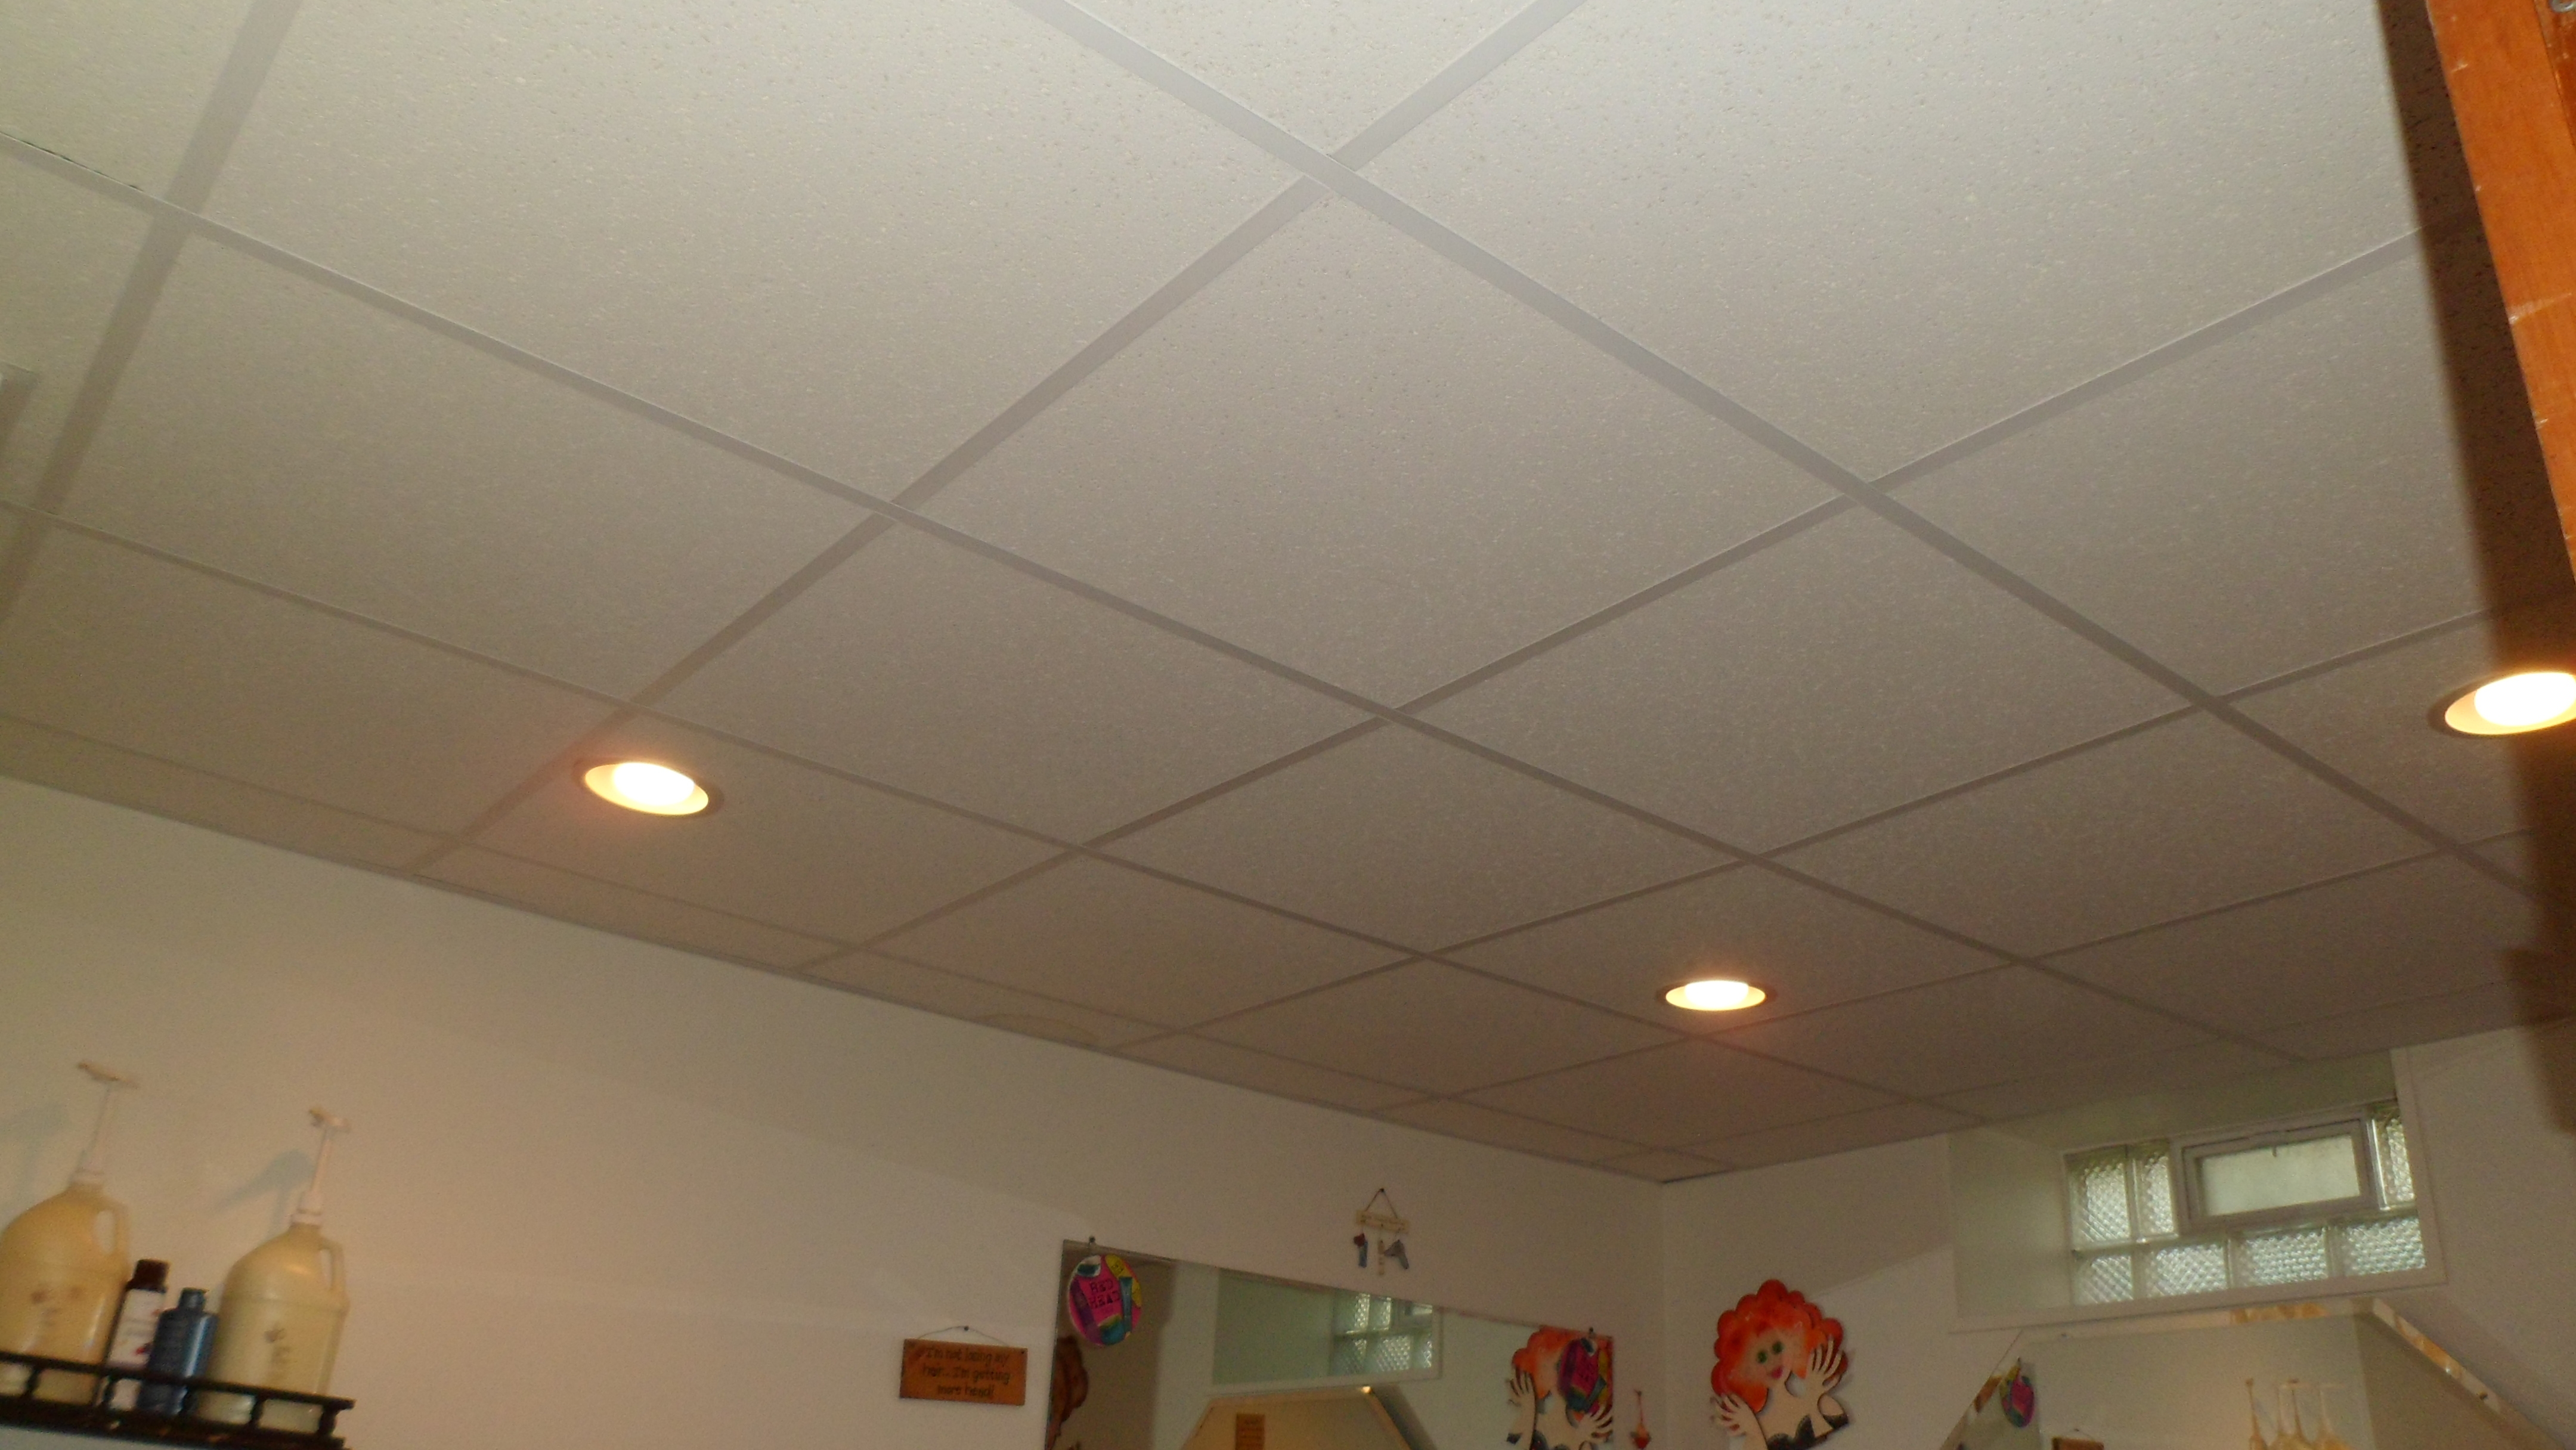 Permalink to Cutting Ceiling Tiles For Pot Lights